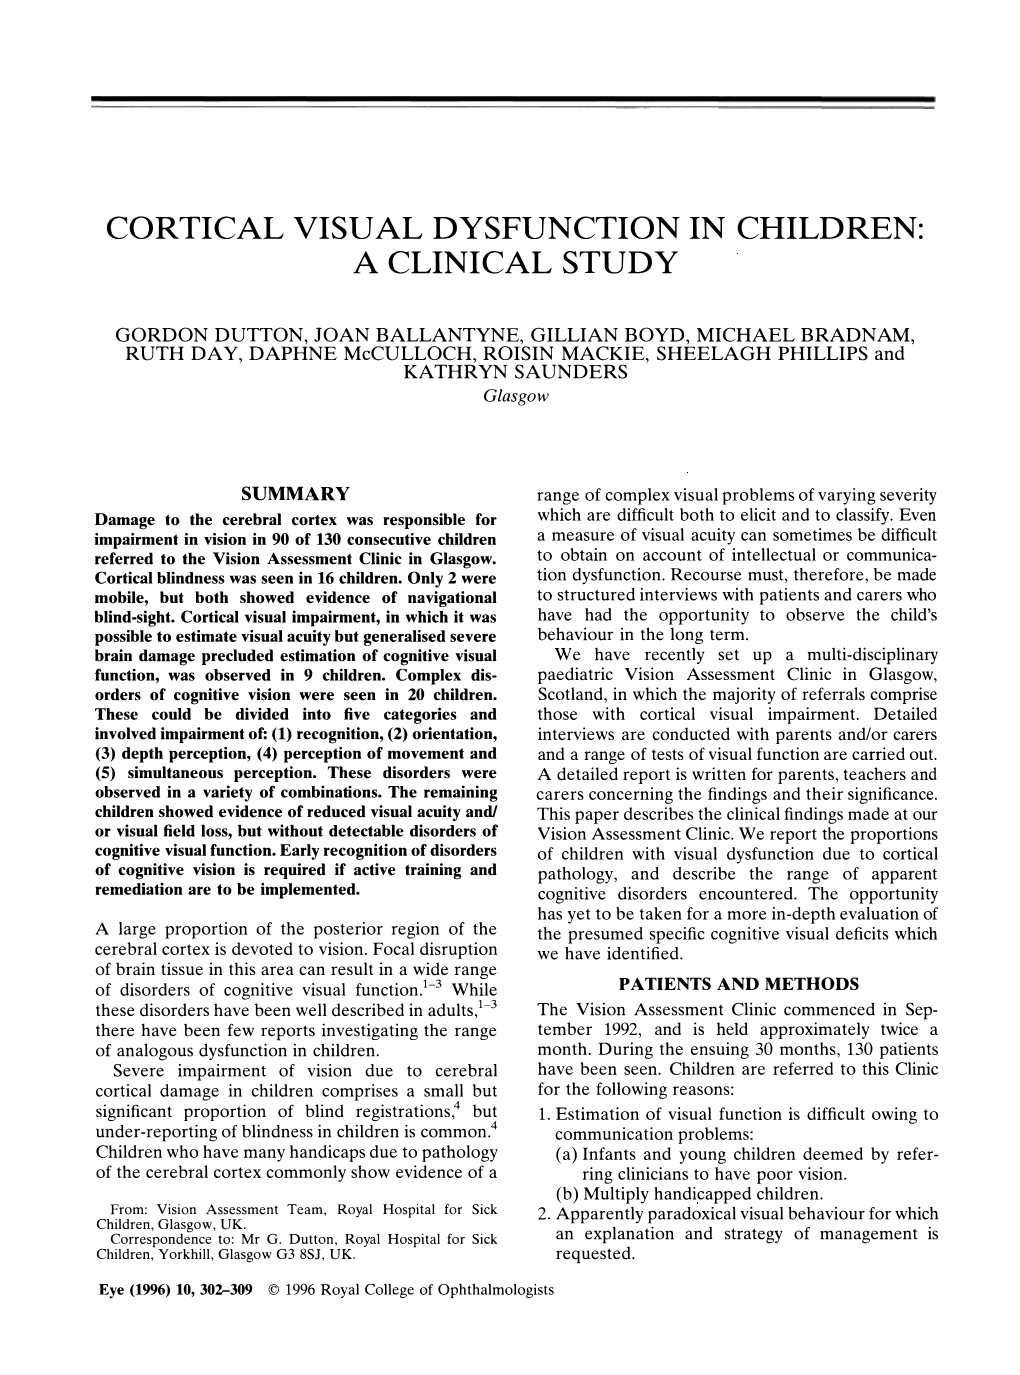 Cortical Visual Dysfunction in Children: a Clinical Study